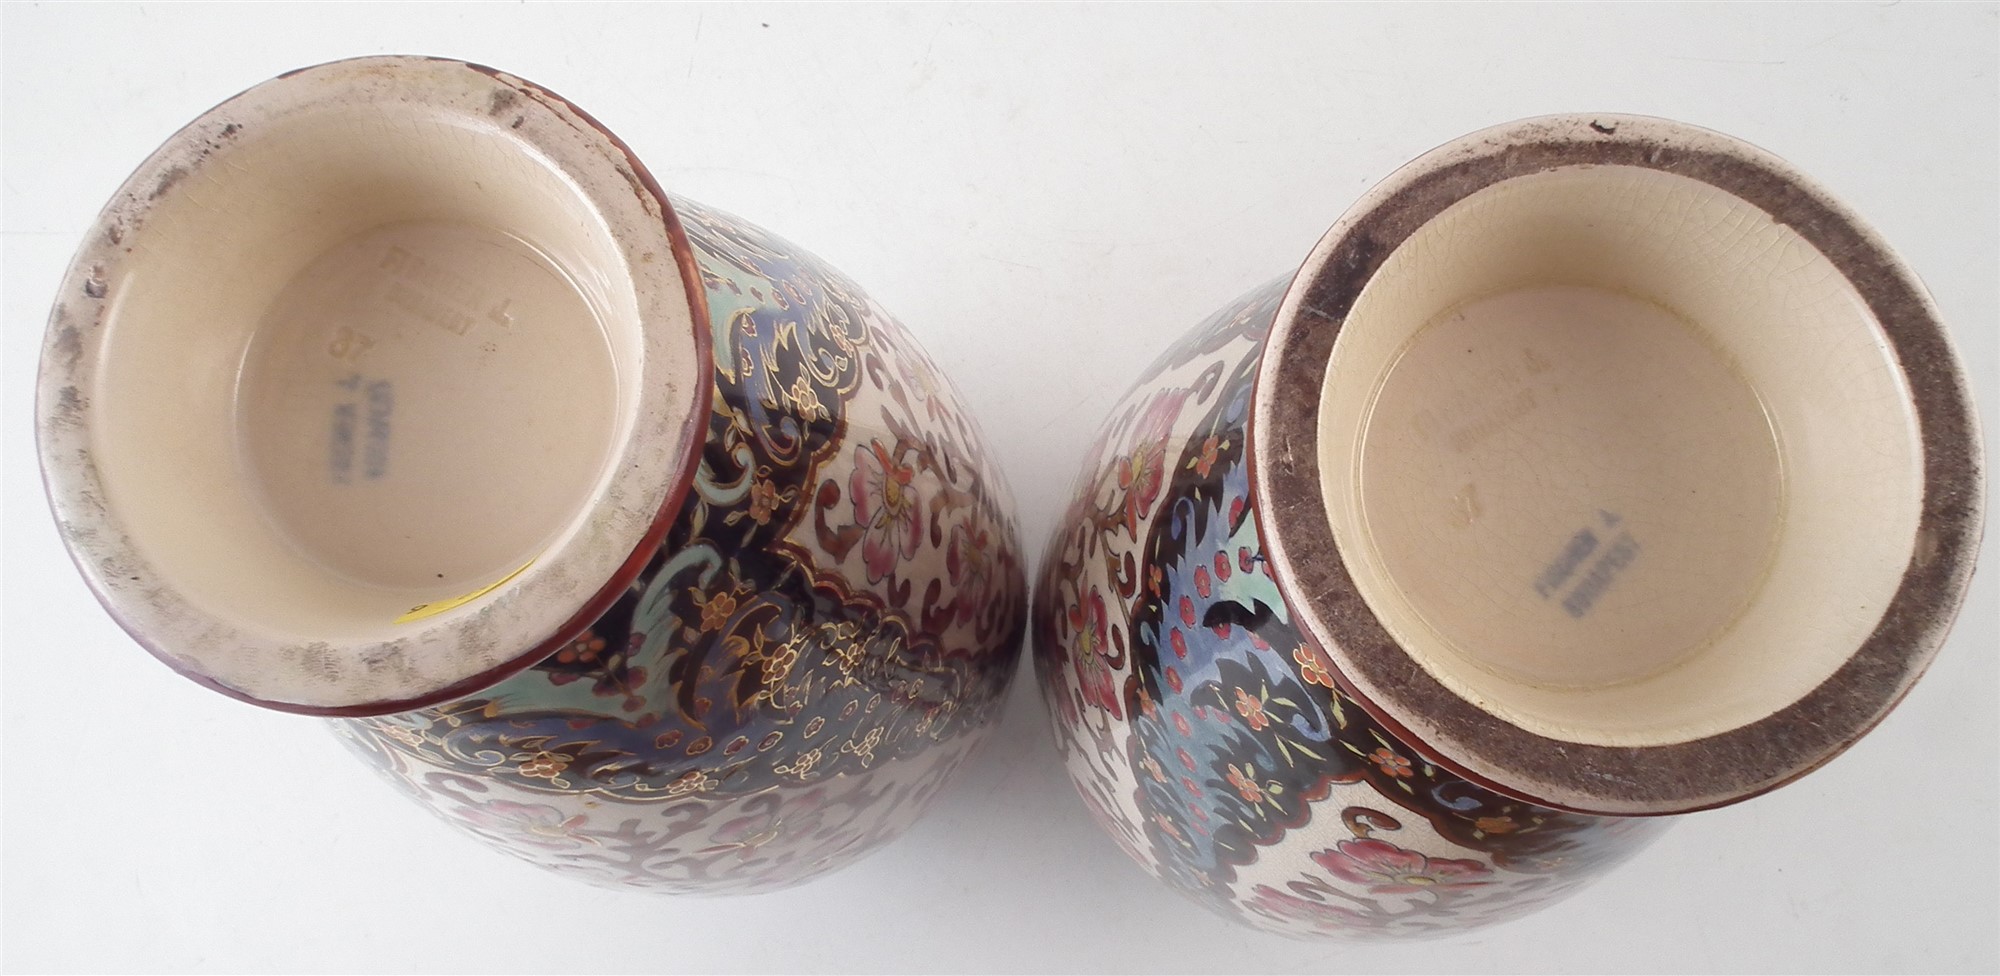 Pair of Fischer vases, decorated with densely scrolling floral patterns, impressed and printed marks - Image 4 of 6